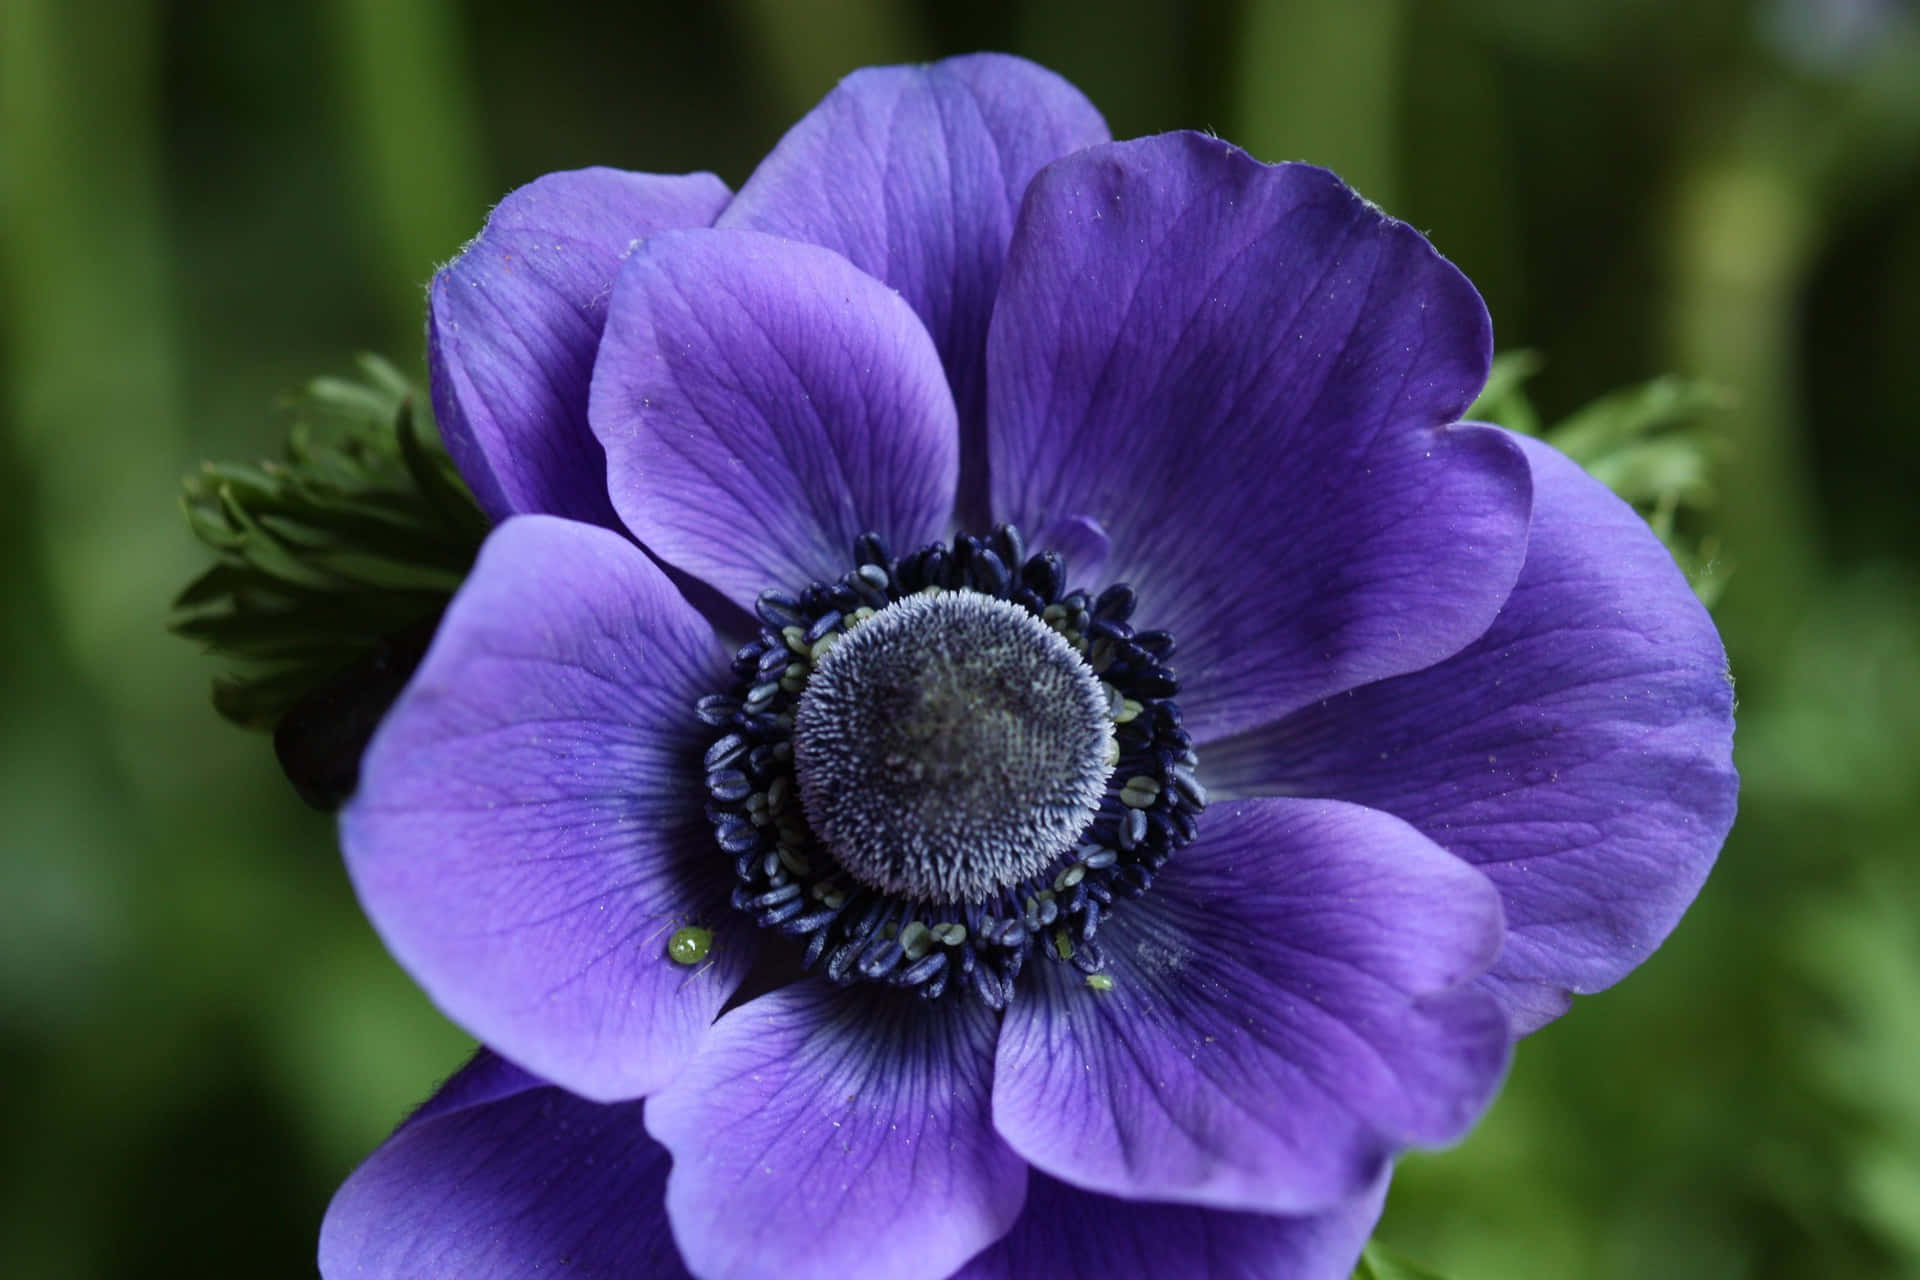 A single anemone flower surrounded by its delicate petals